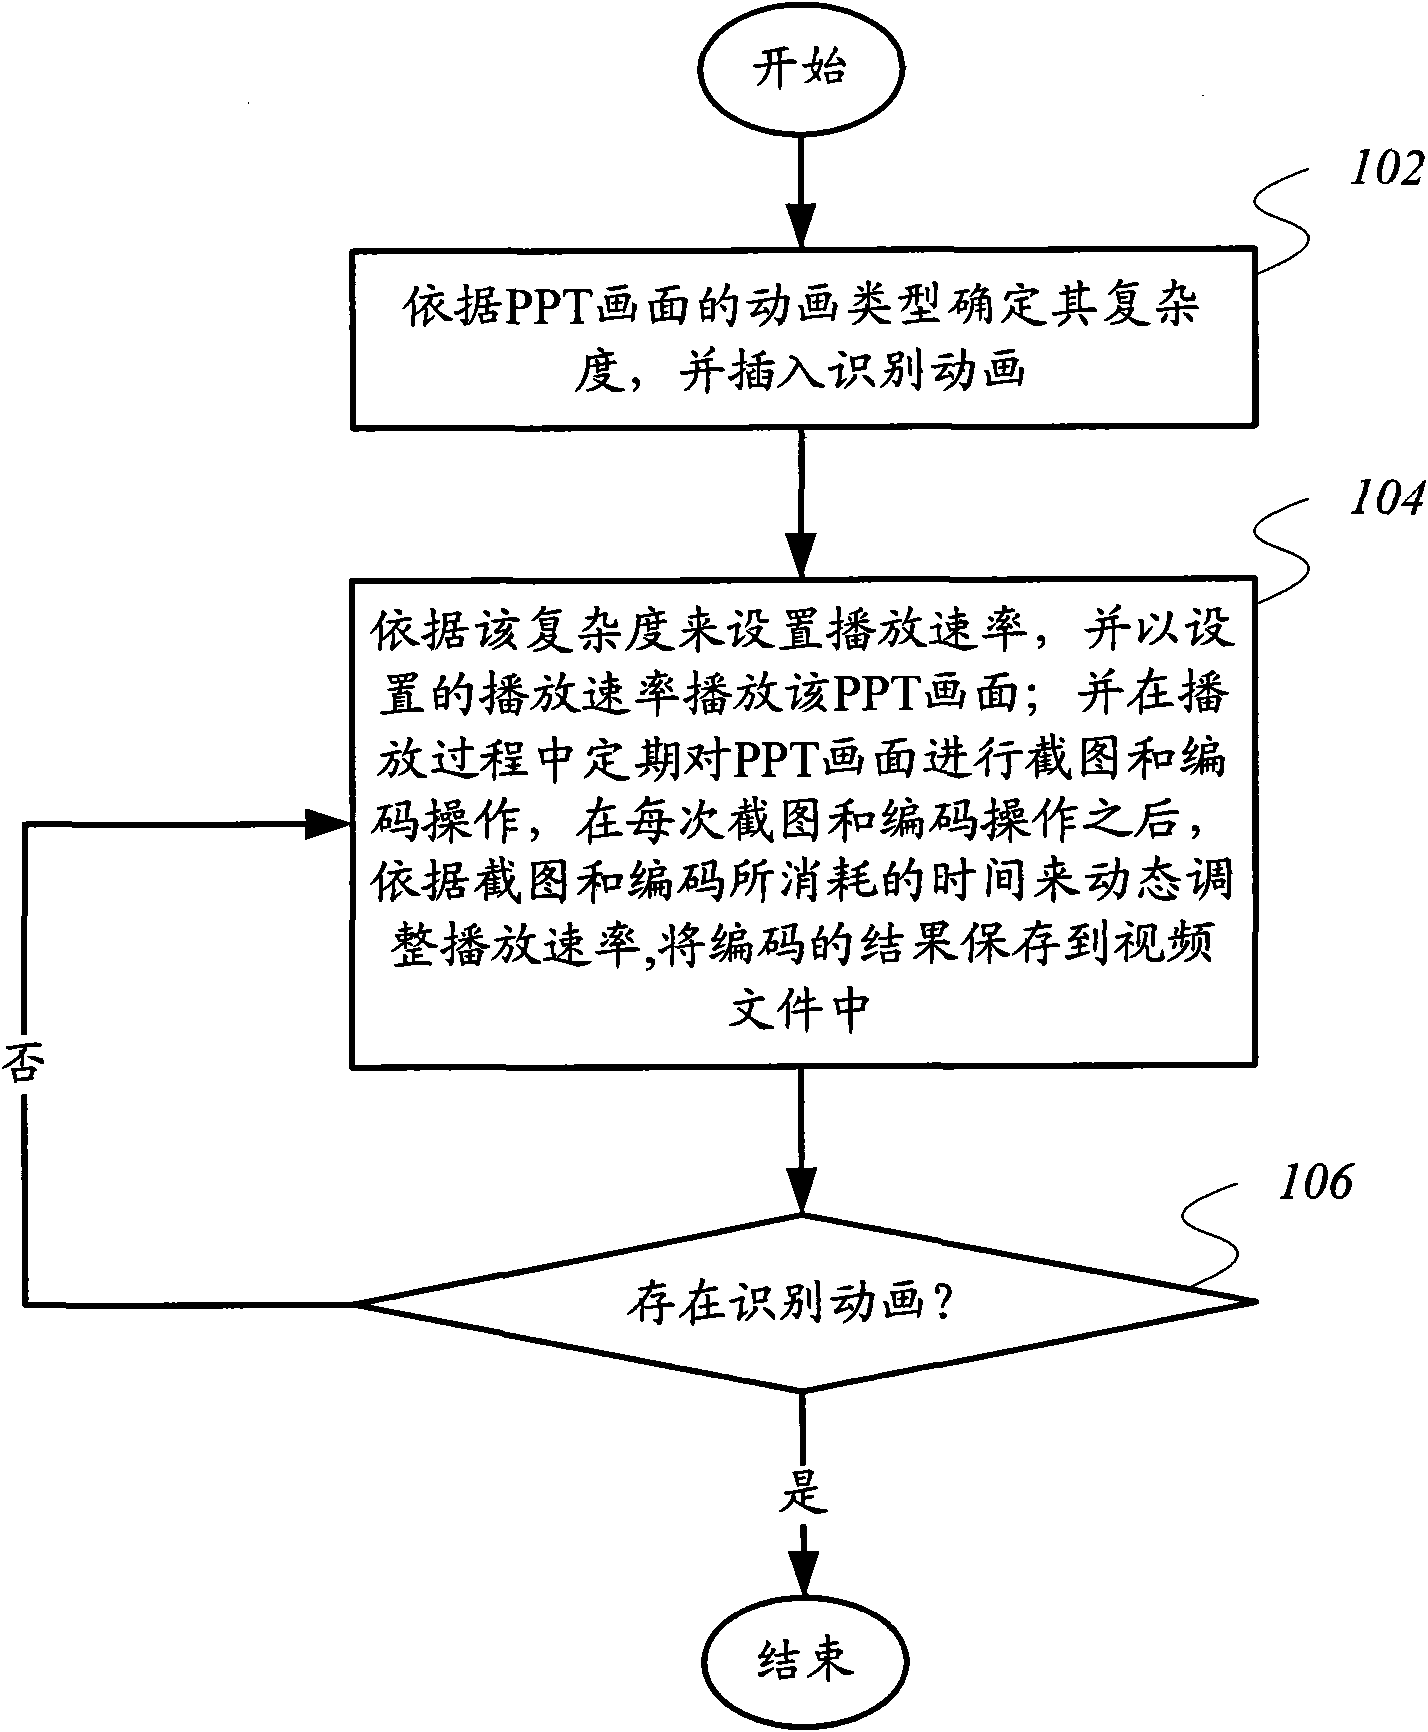 Method and system for conversing PPT into video